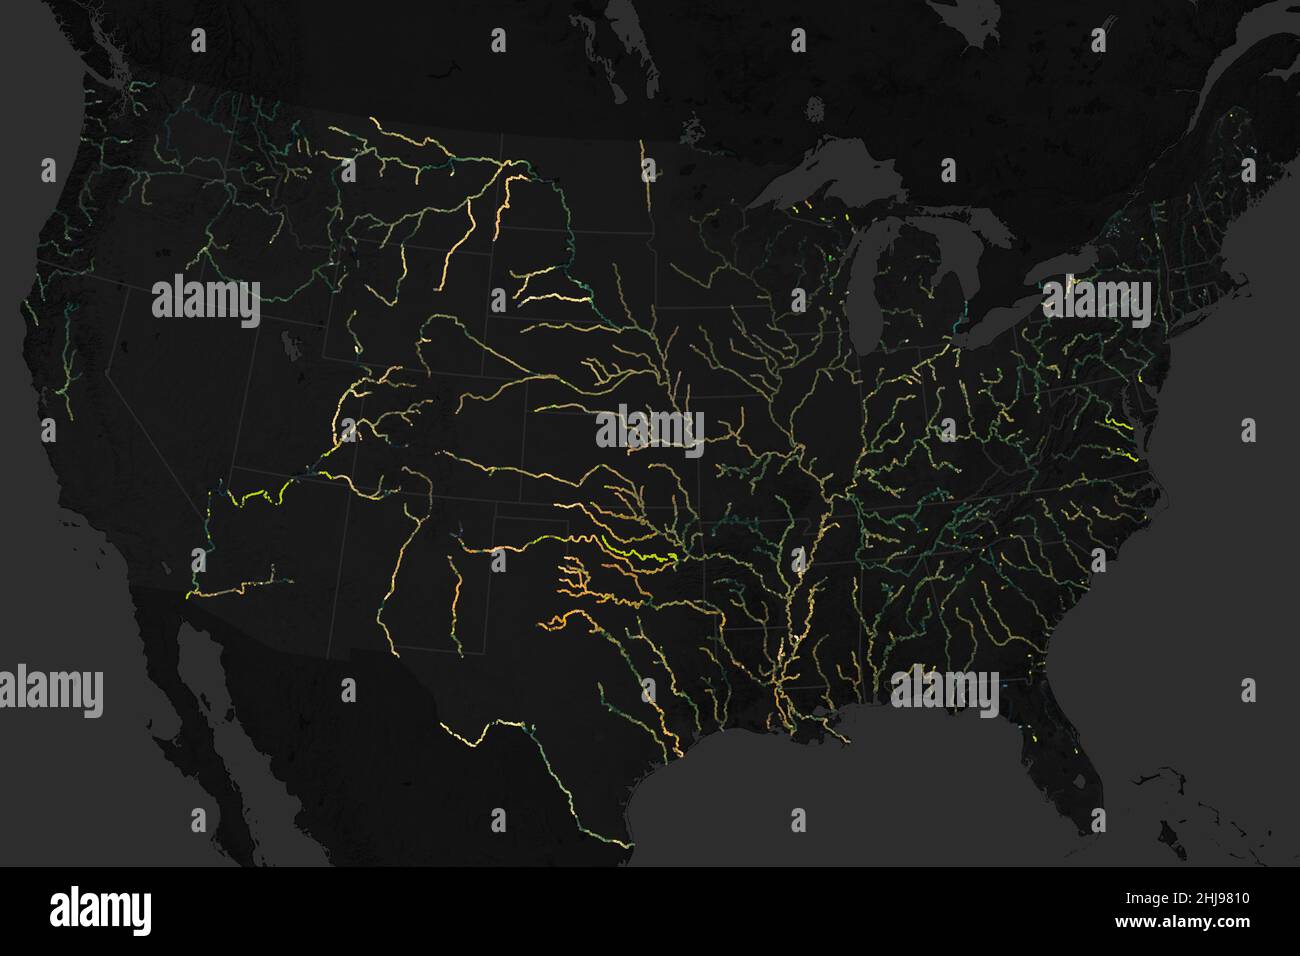 Much like the sky, rivers are rarely painted one color. Rivers around the world appear in shades of yellow, green, blue, and brown-and subtle changes in the environment can alter their colors. New research shows the dominant color has changed in about one-third of large rivers in the continental United States over the past 35 years. The figure above shows data from a map of river color for the contiguous United States. The rivers are colored as they would approximately appear to the human eye. The map was built from 234,727 images collected by Landsat satellites between 1984 and 2018. The data Stock Photo